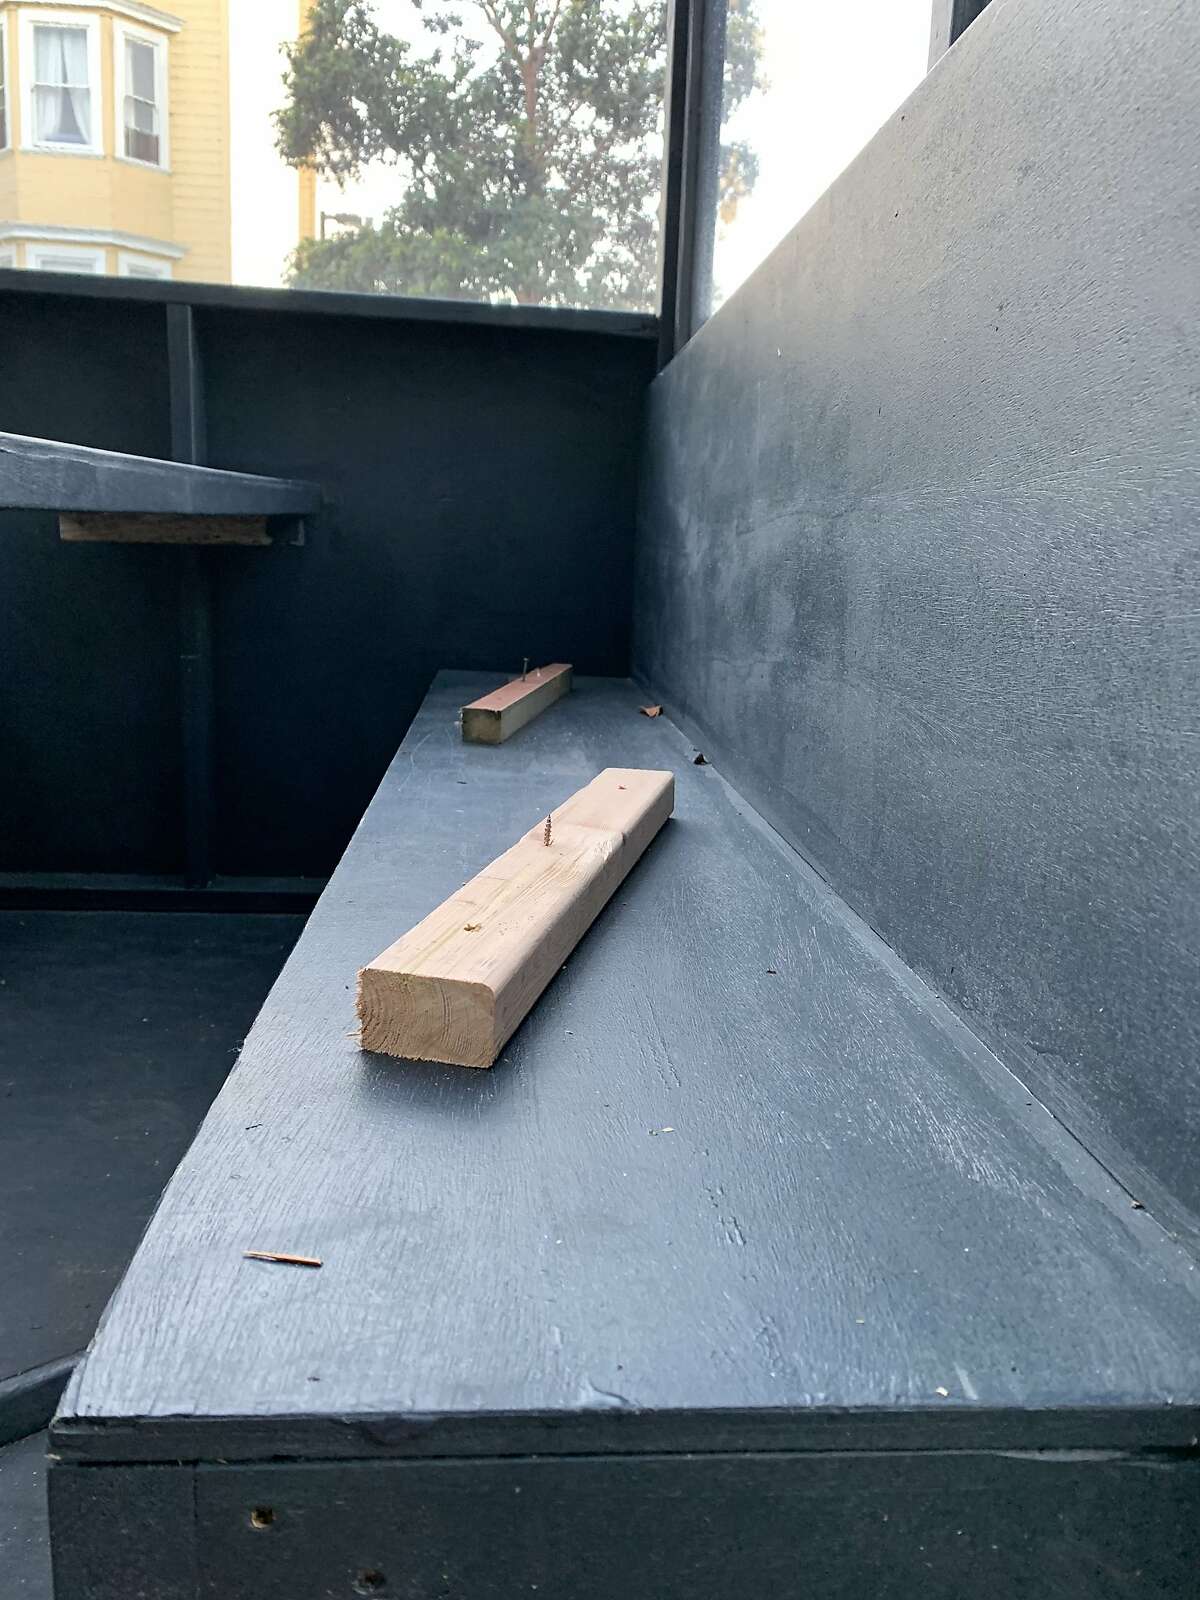 The dining parklet at the Valencia Room, a Mission bar at the center of a controversy over exposed nails in its parklet. The bar says it was vandalized, but a homelessness expert says the nails were an attempt to deter people seeking shelter.